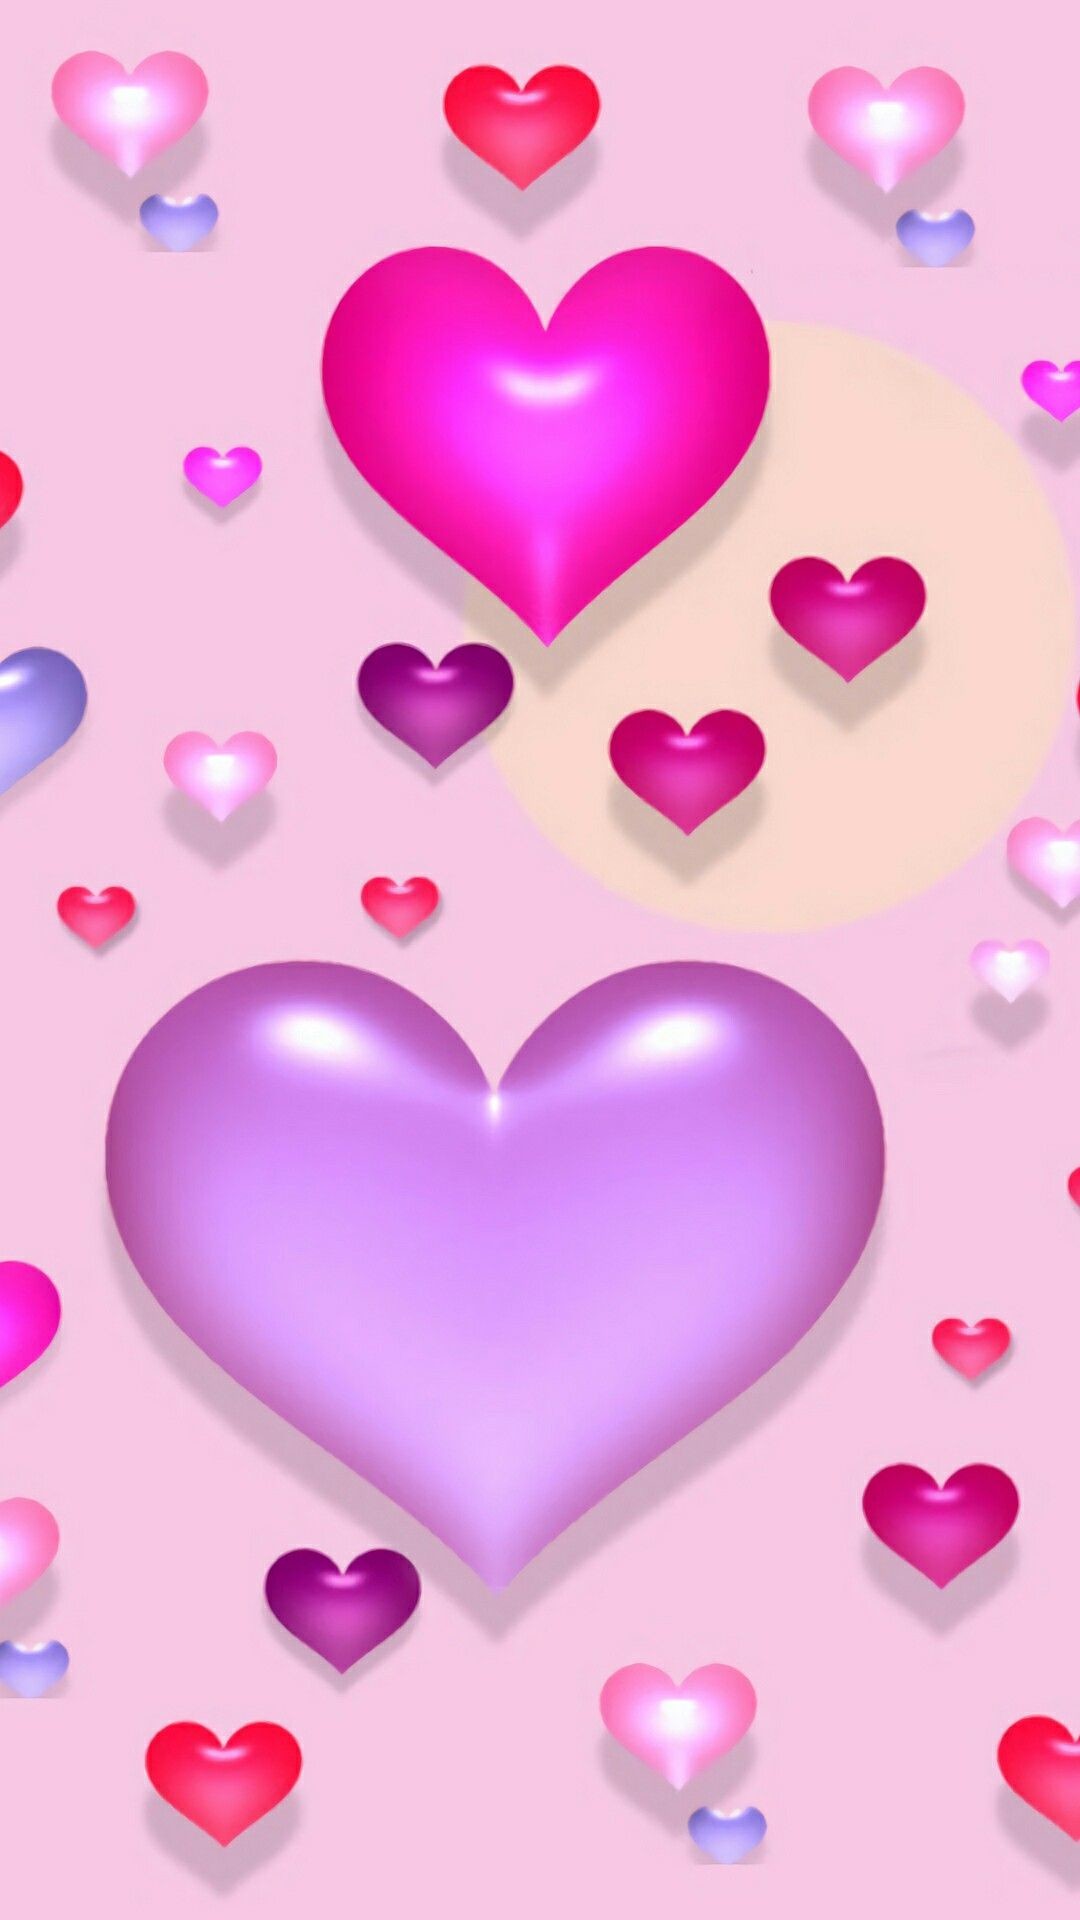 Hearts - Hearts Background , HD Wallpaper & Backgrounds